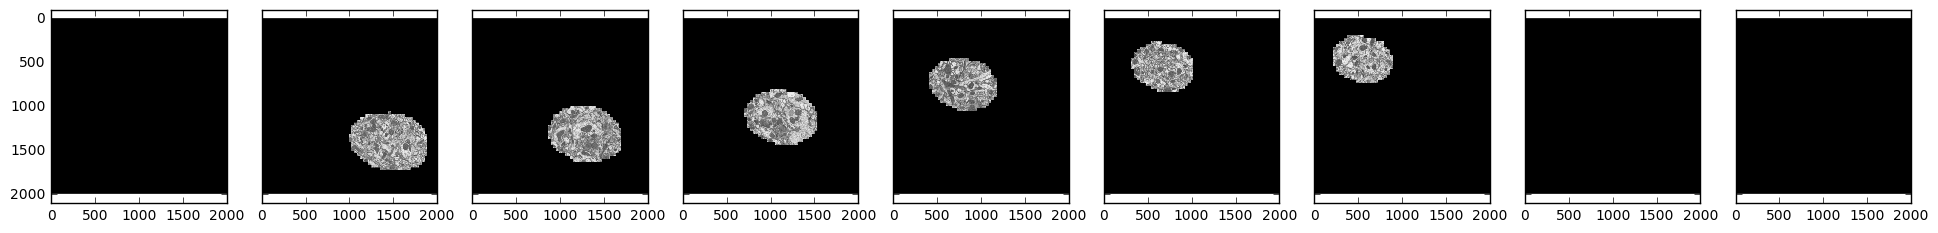 Sample electron microscopy images over time